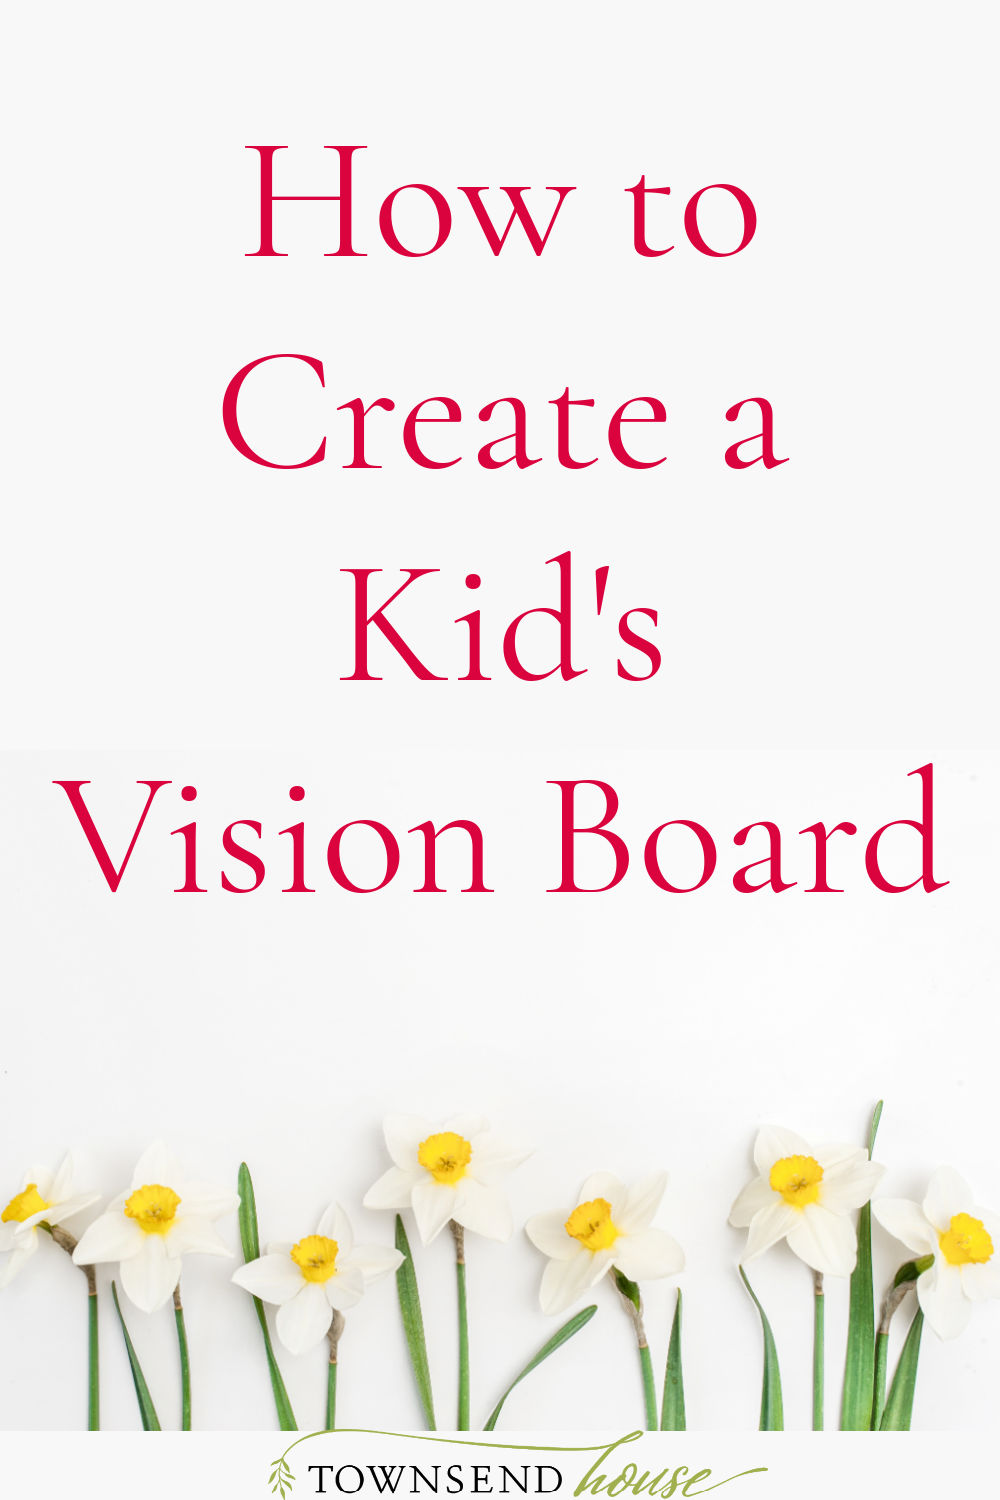 How to Create a Kid’s Vision Board